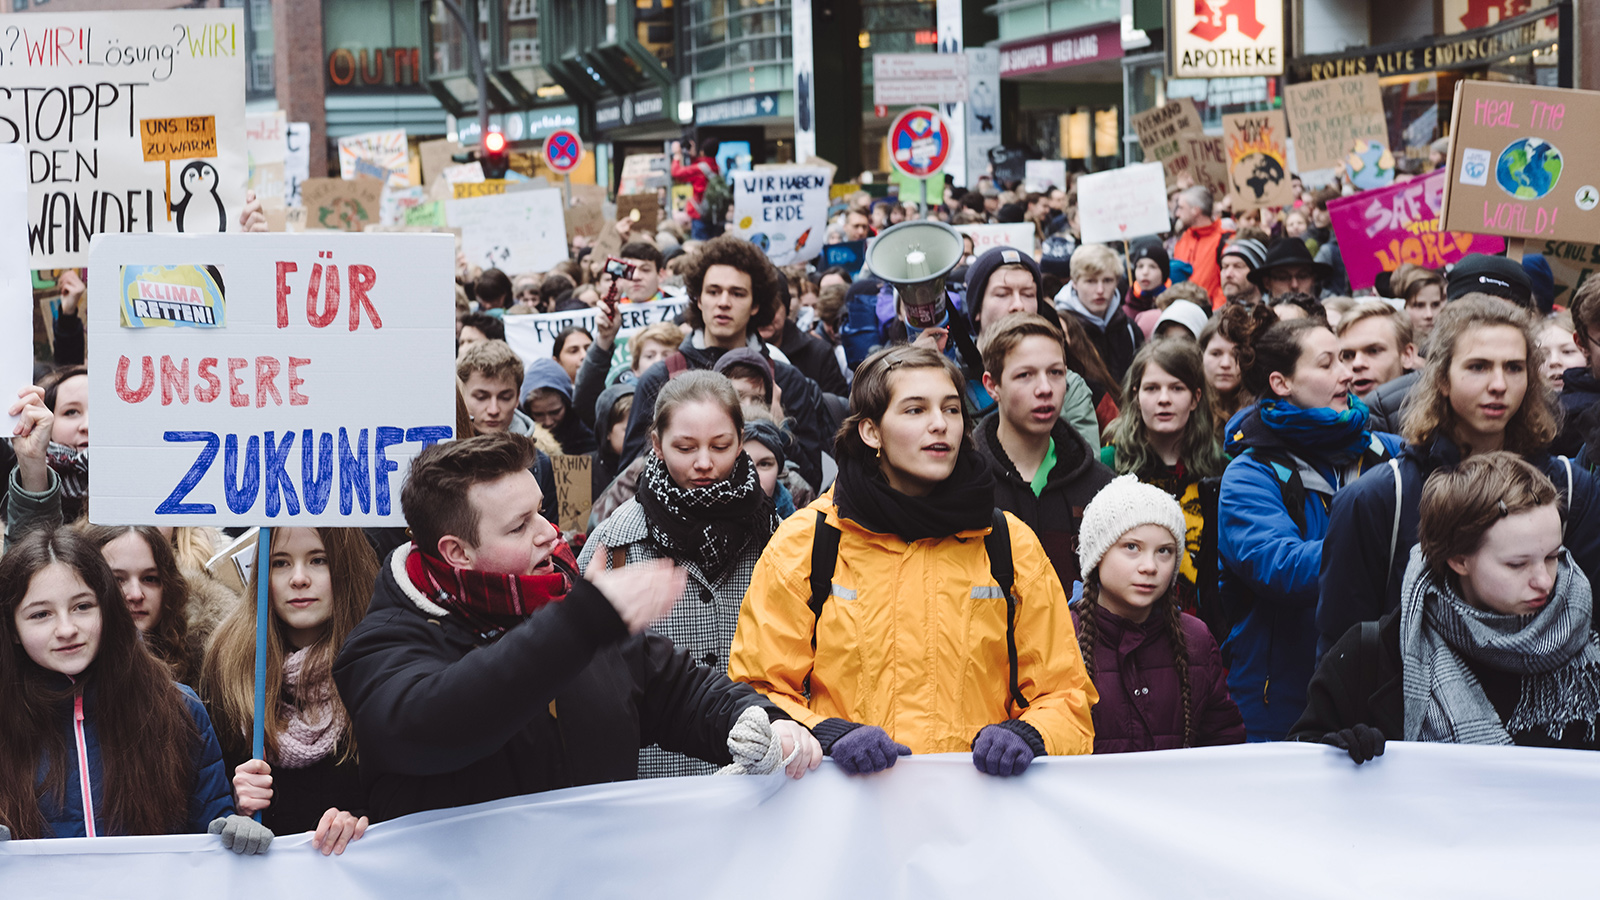 ecosia-joins-climate-strike-march-fridays-for-the-future-greta-thunberg